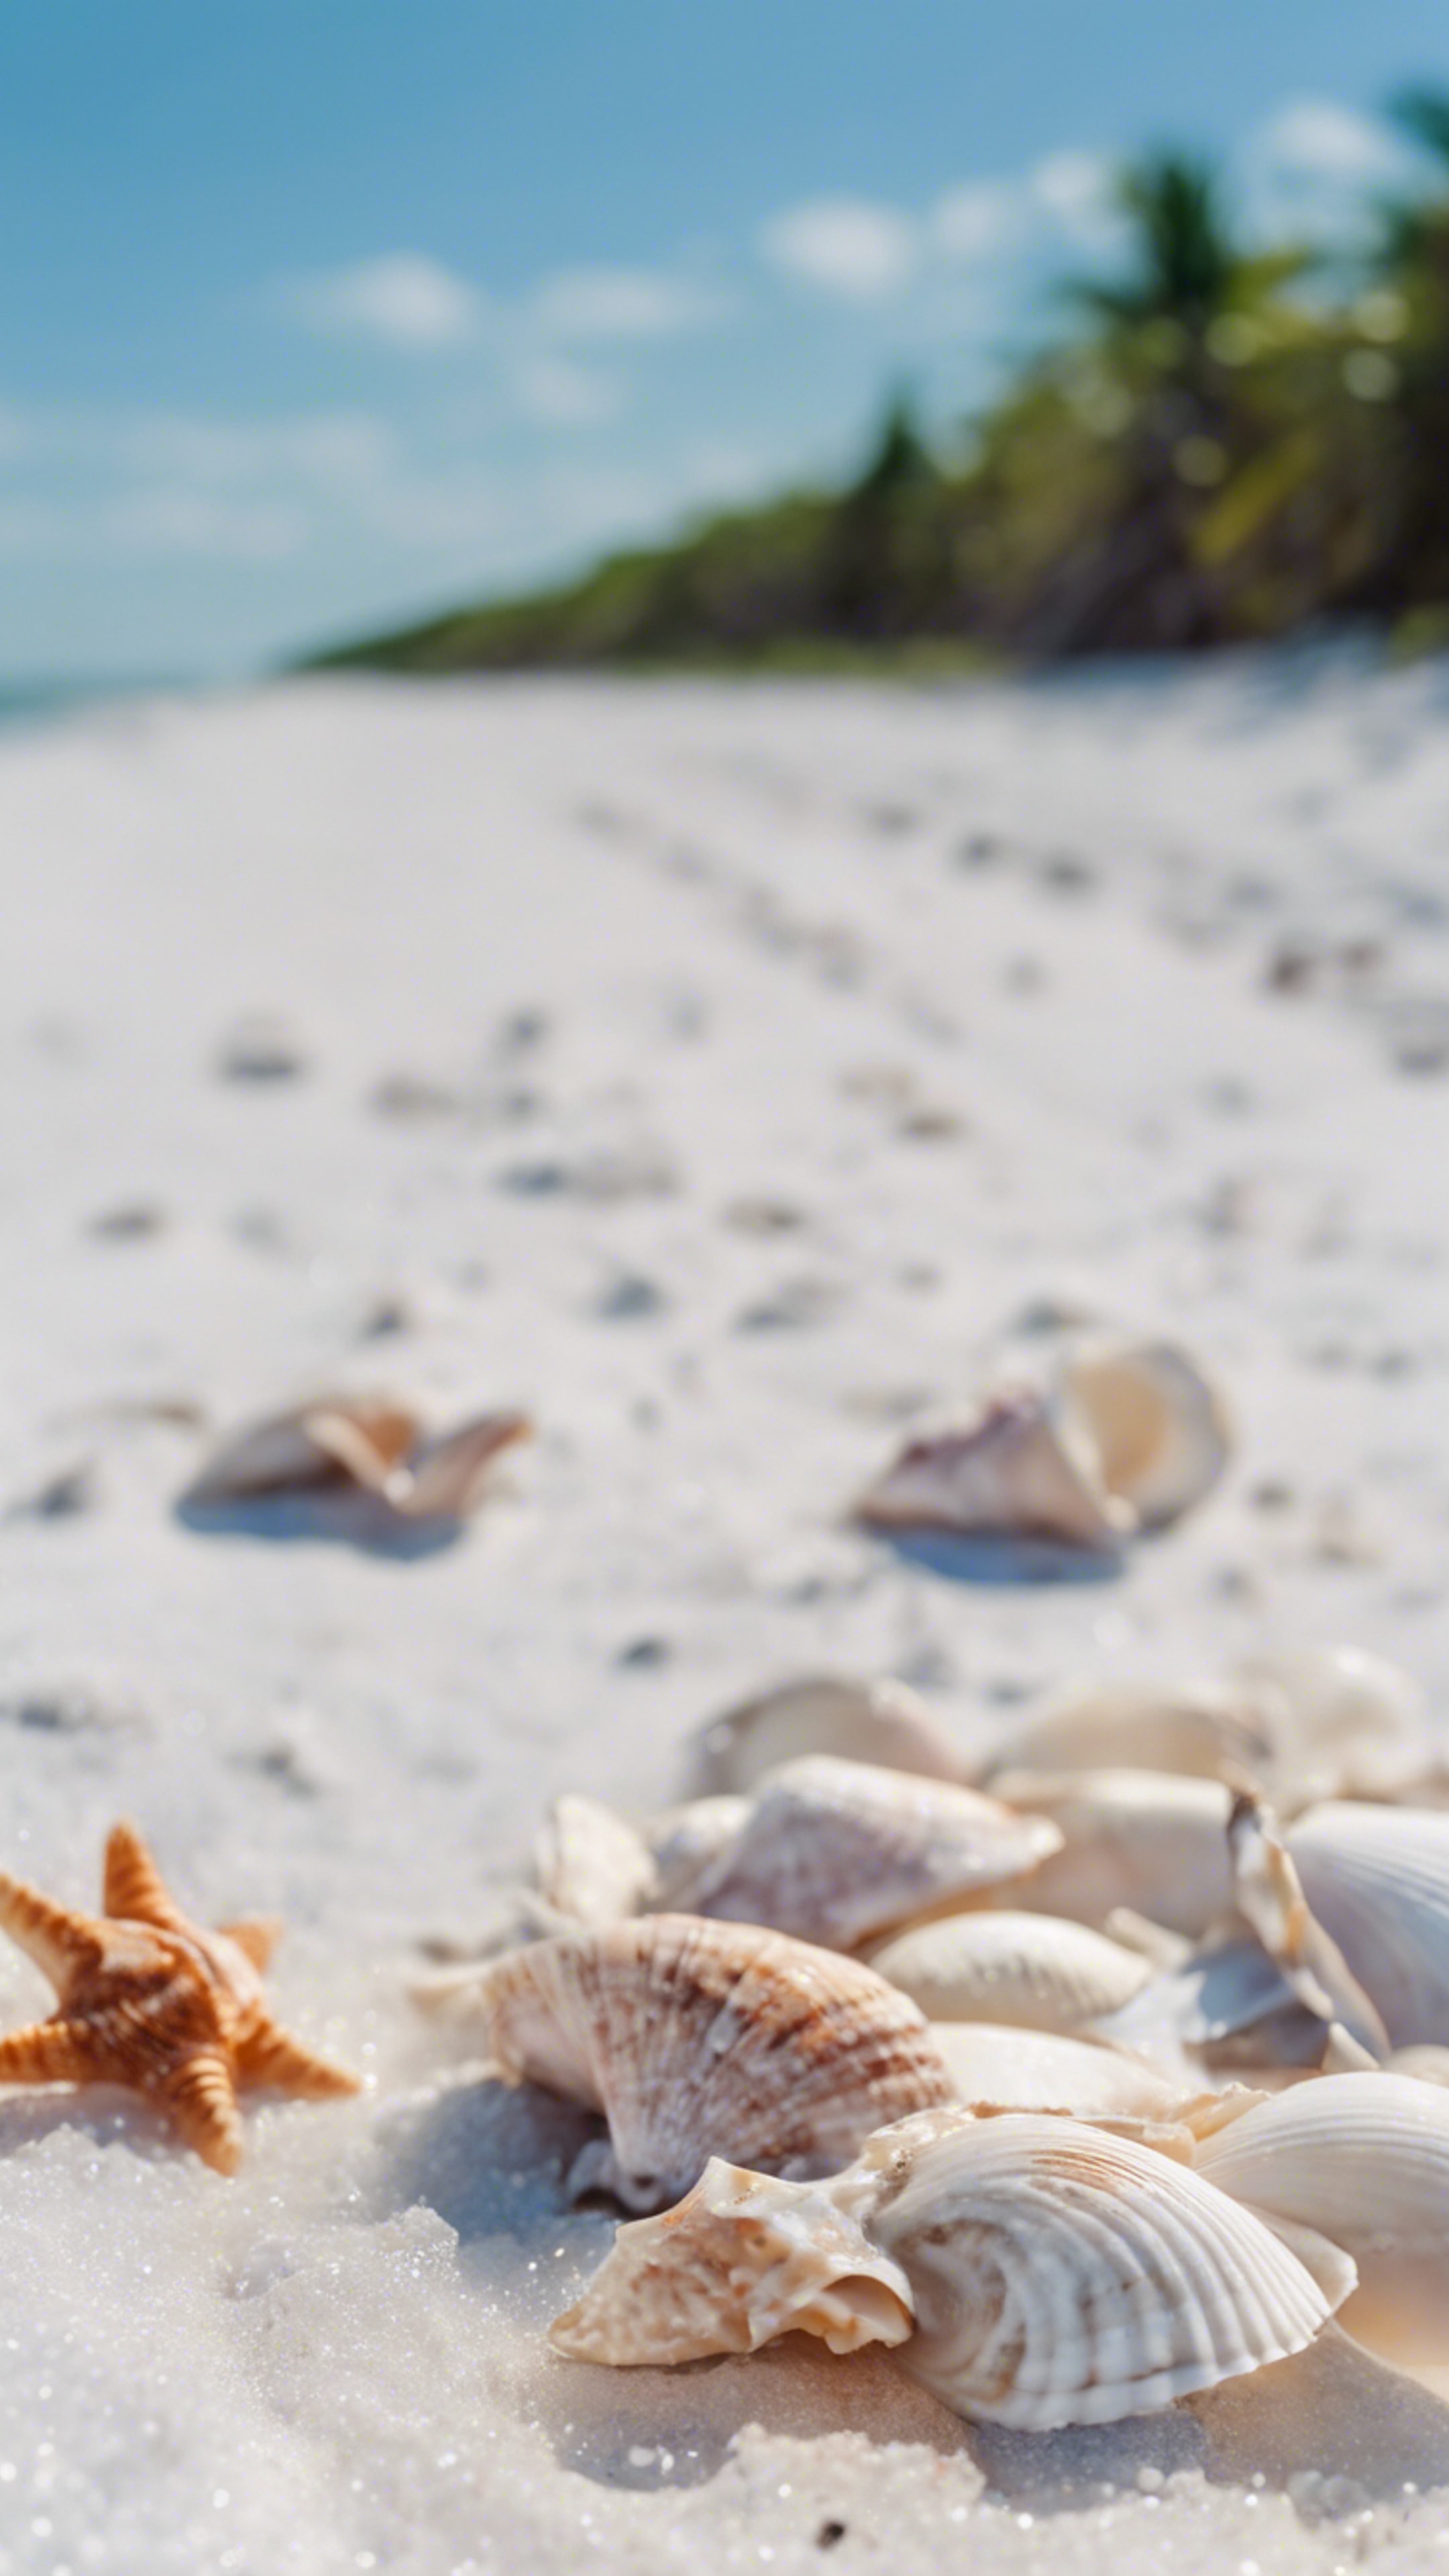 Seashells scattered along the pure white sandy beaches of Sanibel Island under clear, blue skies.壁紙[1c53aef66a12437c830d]